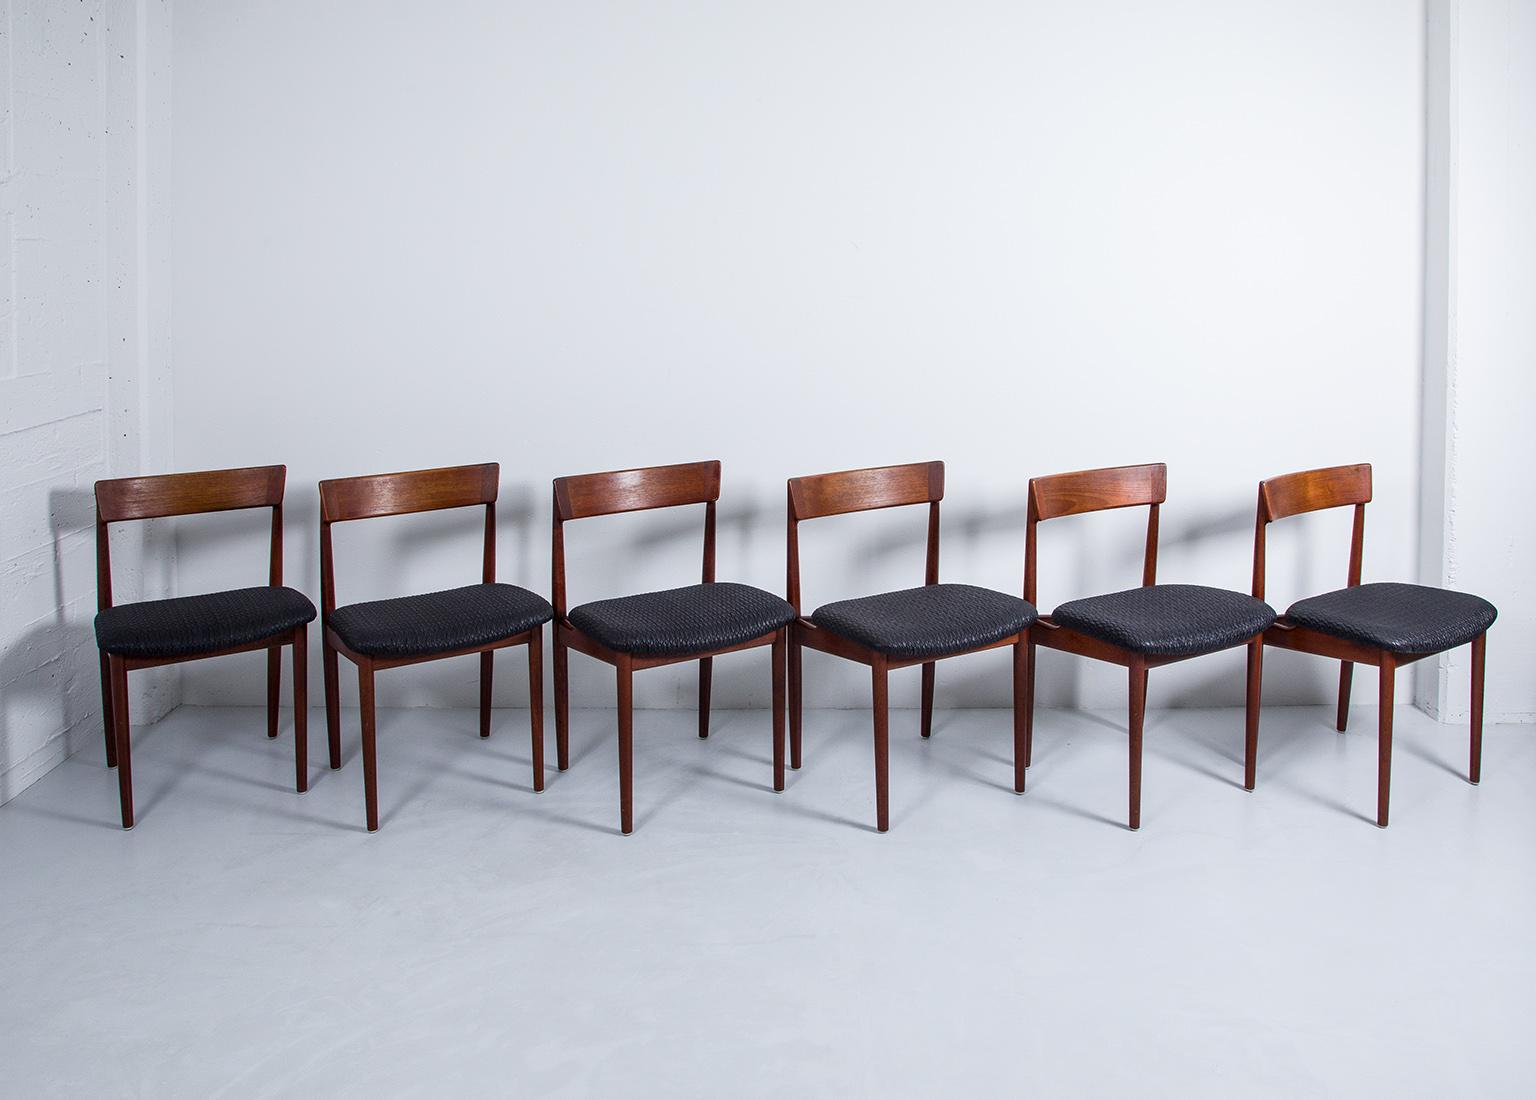 Set of six rosewood dining chairs, model 39, designed by Henry Rosengren Hansen and produced by Brande Møbelfabrik in Denmark, probably in the 1960s. Reupholstered, labeled.